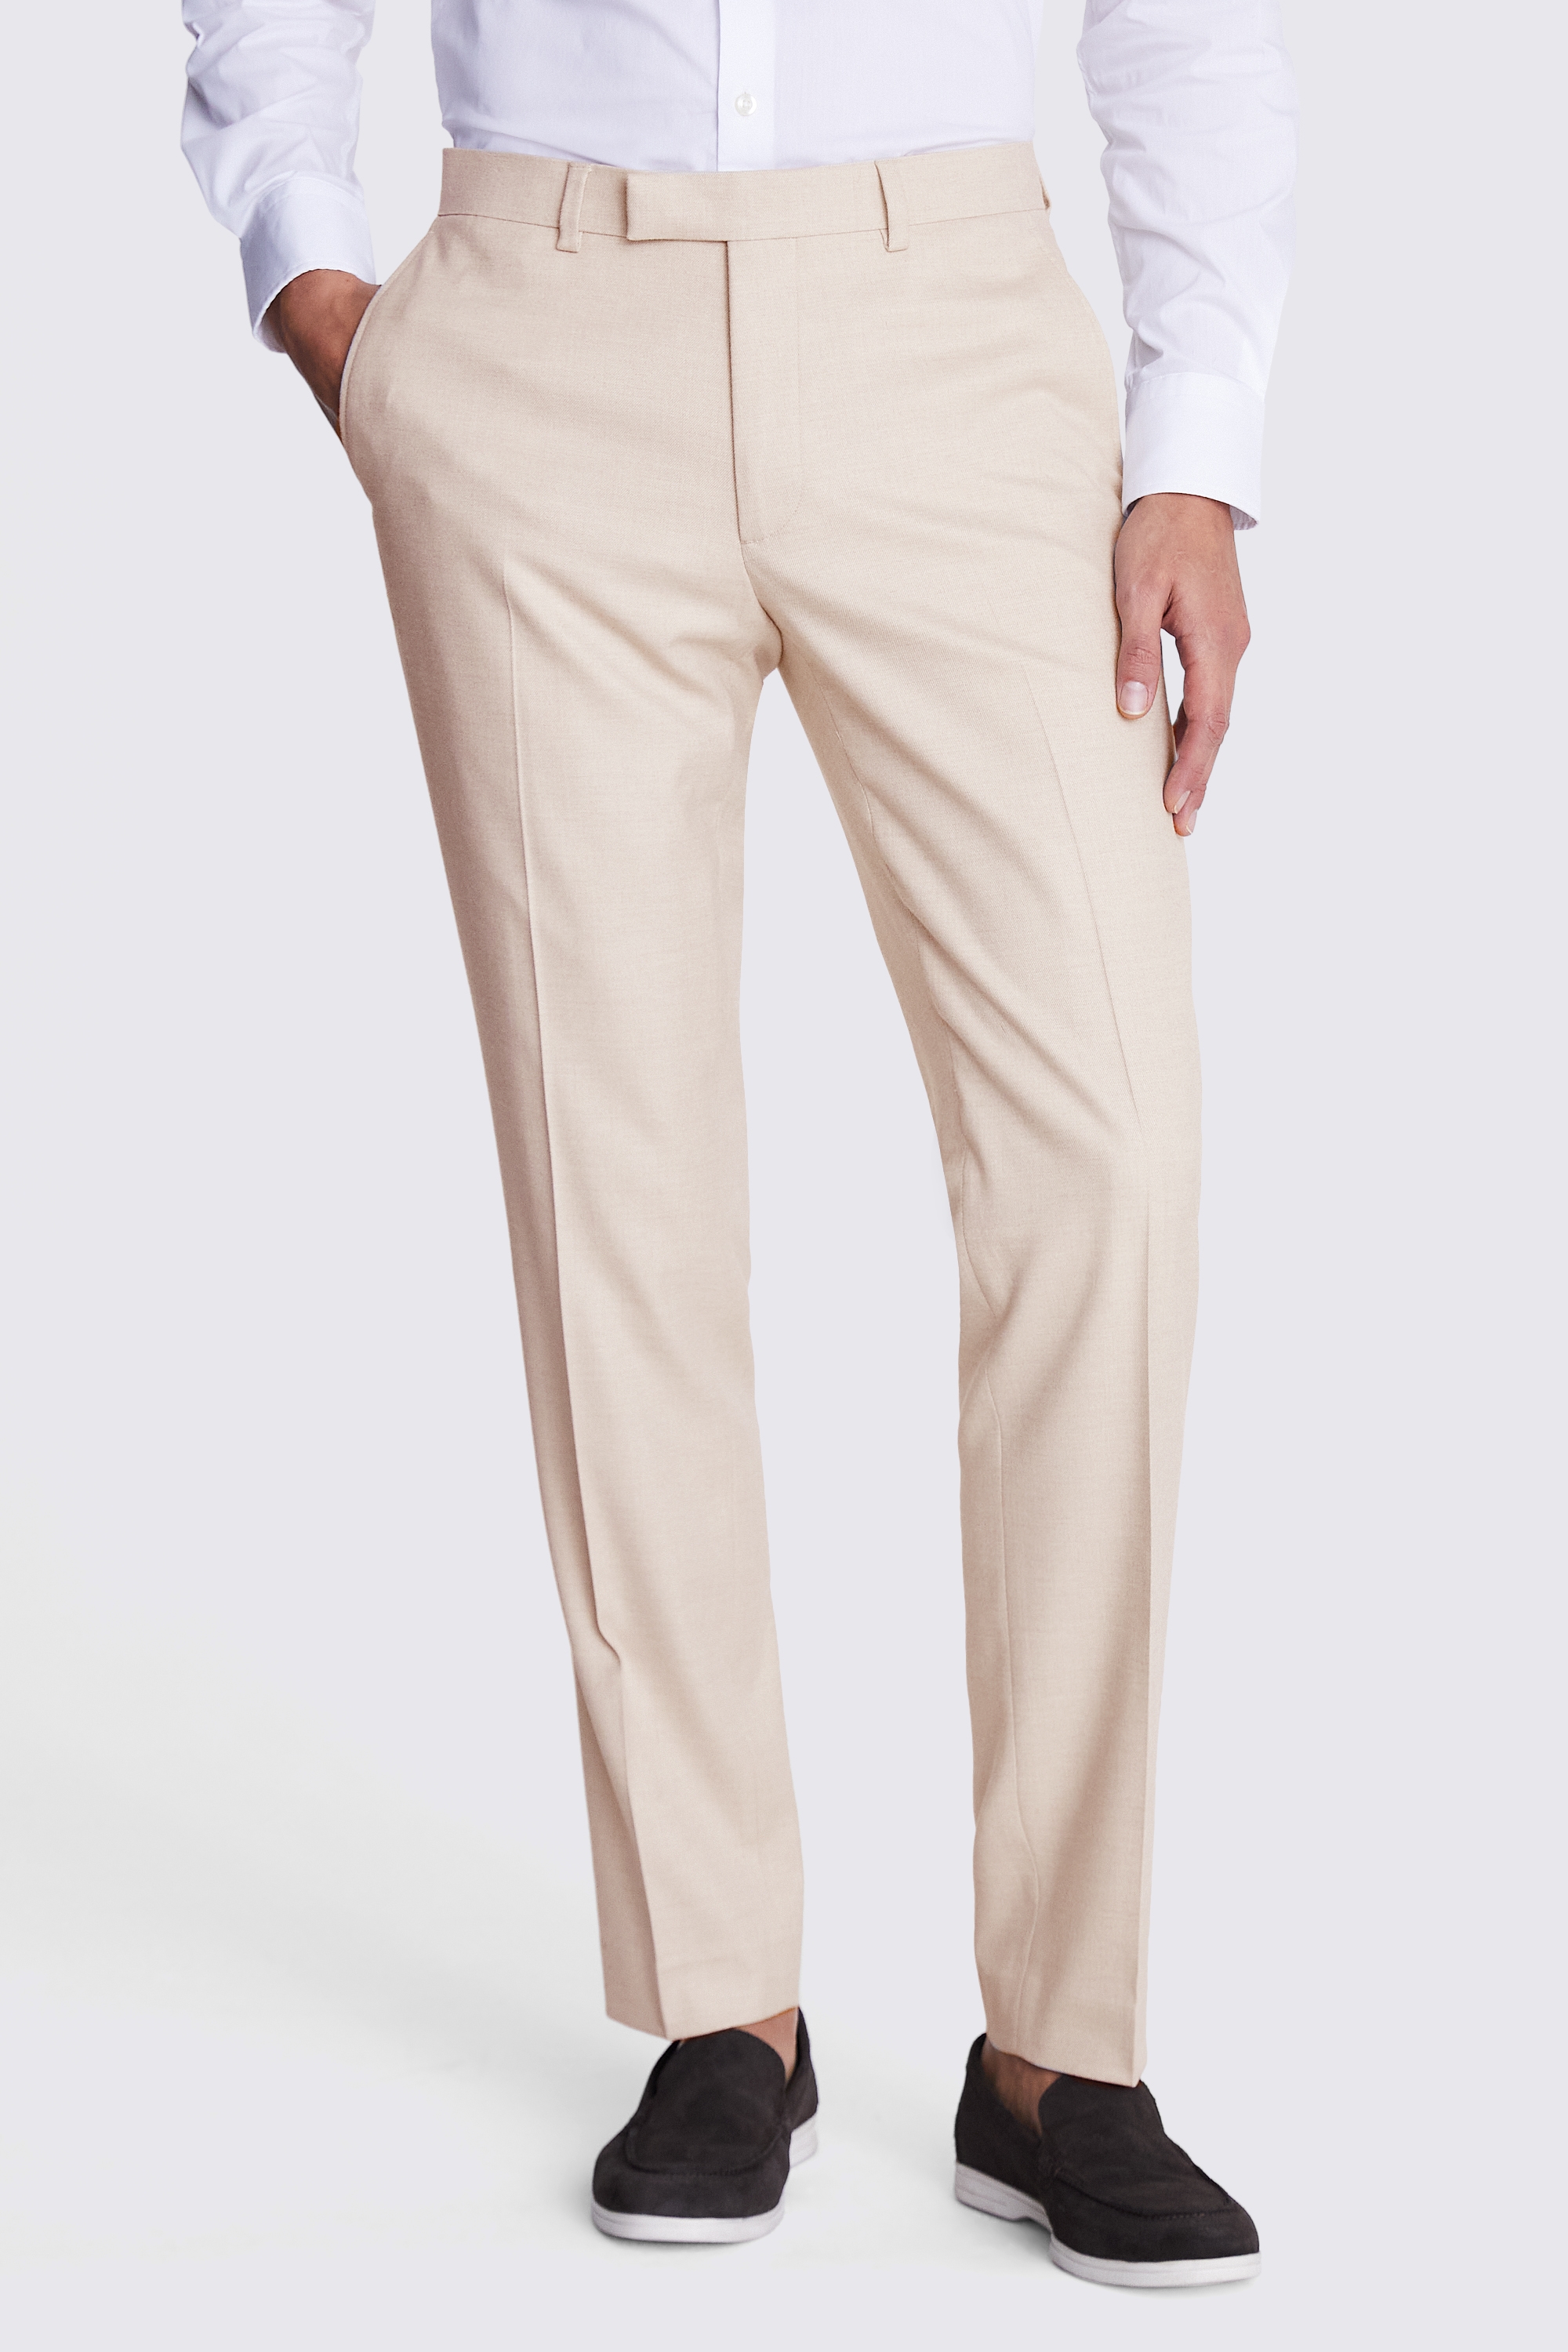 Slim Fit Light Camel Trousers | Buy Online at Moss